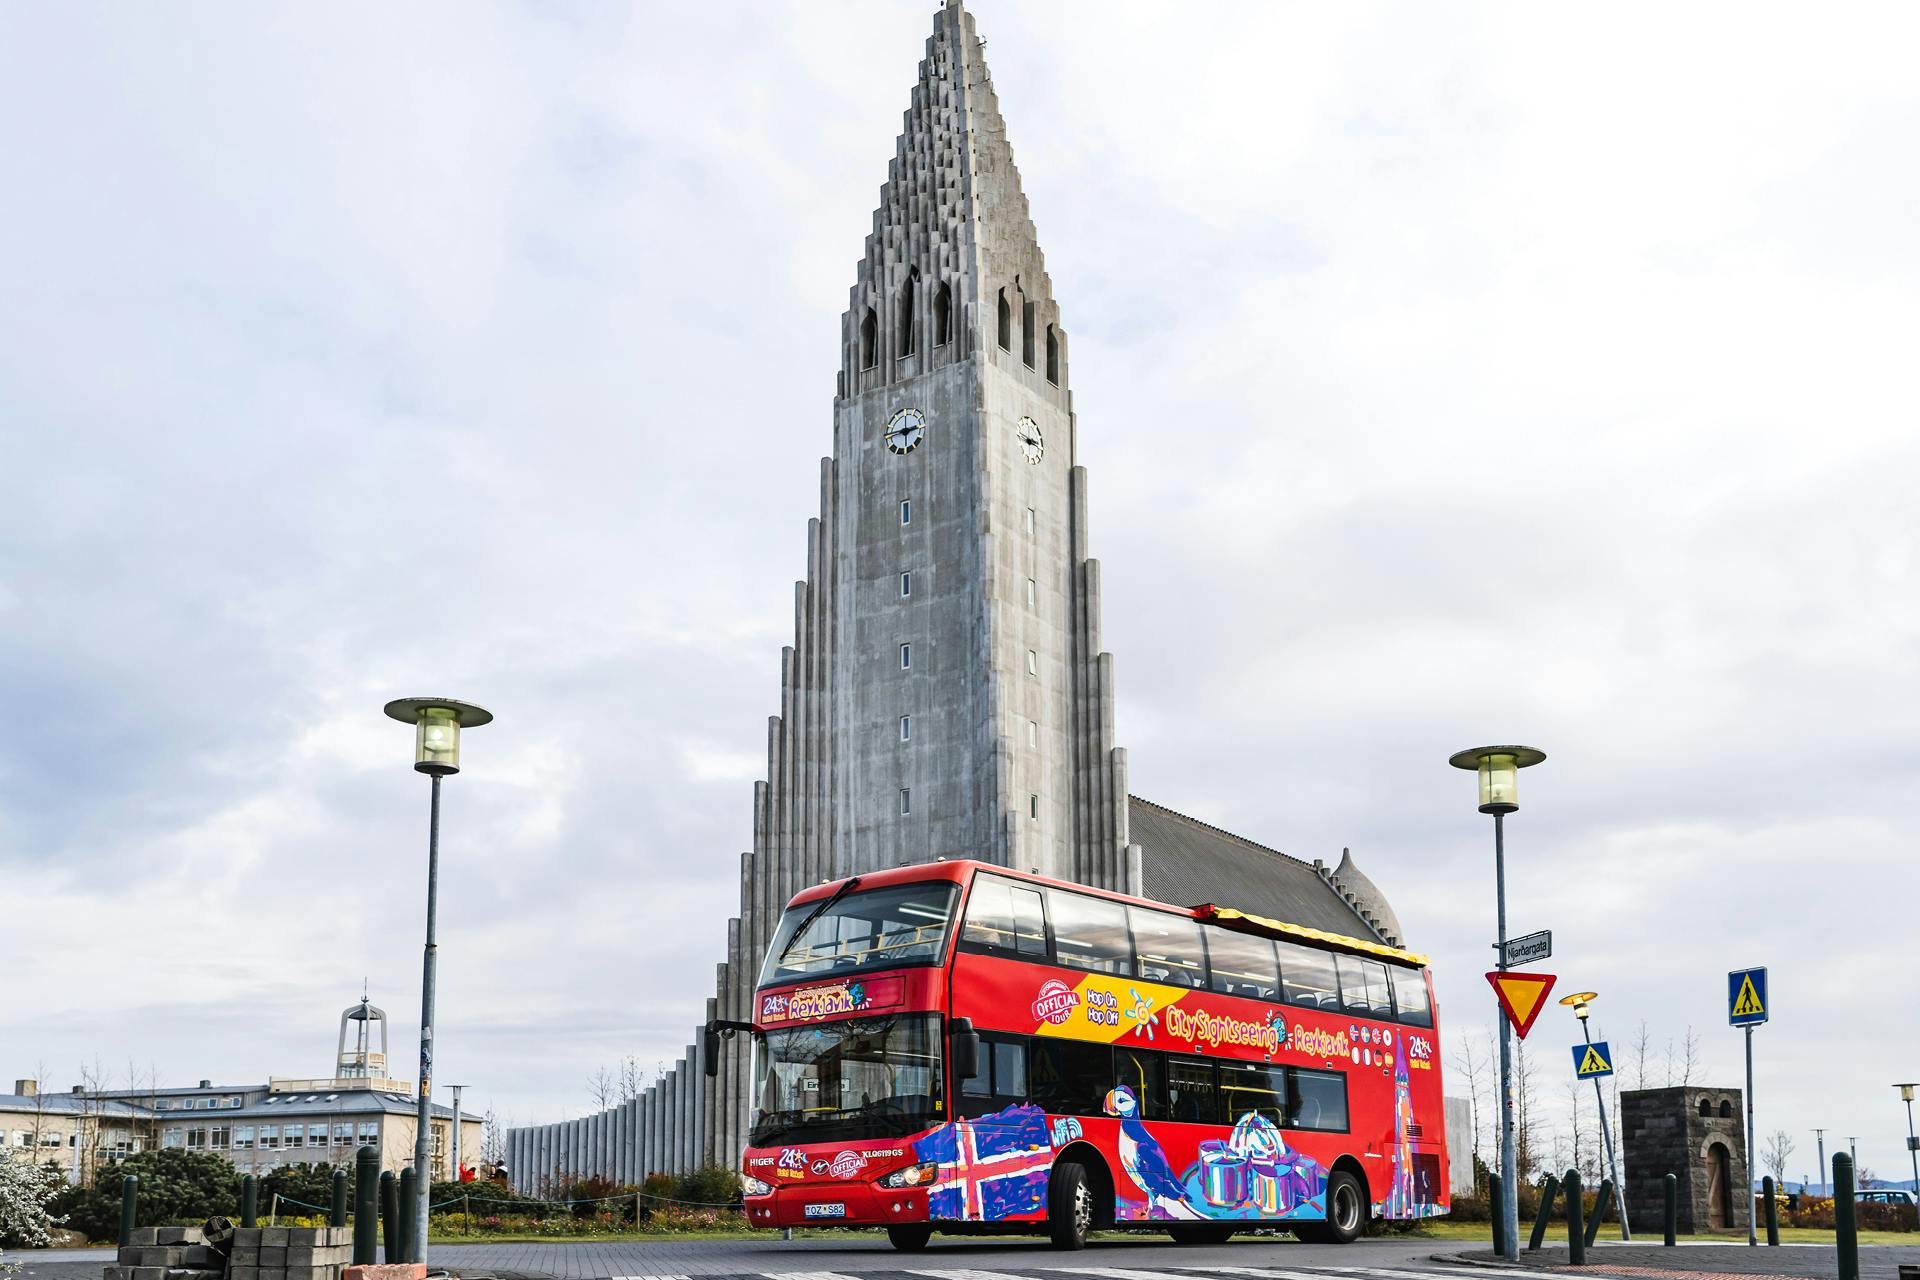 Hop On - Hop Off - City Sightseeing 24 hours